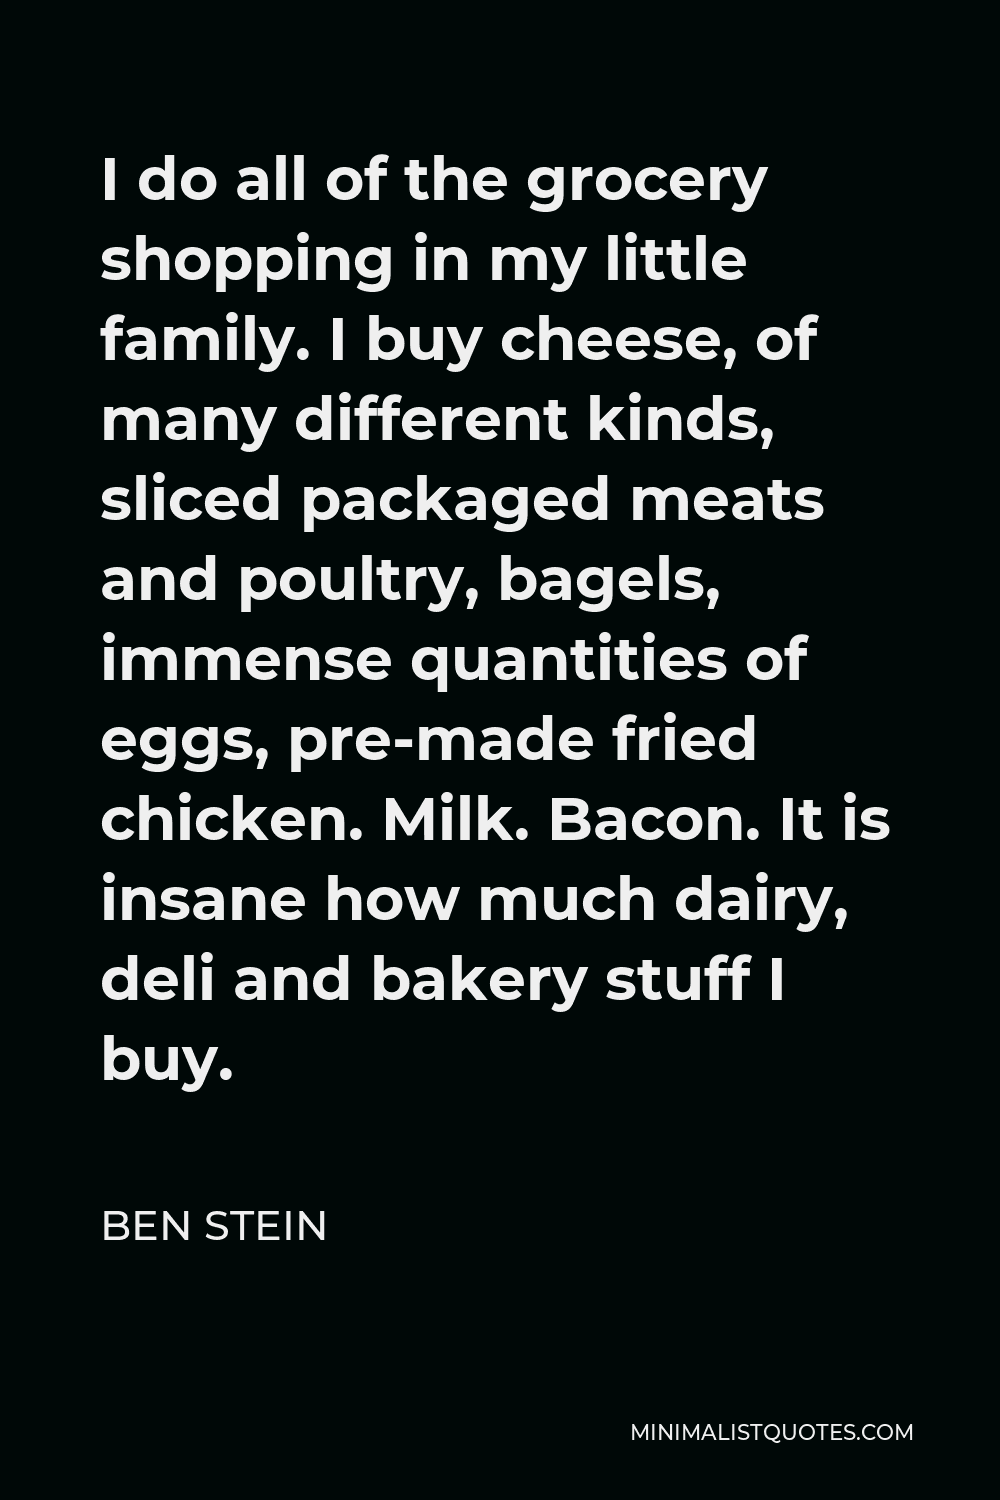 Ben Stein Quote - I do all of the grocery shopping in my little family. I buy cheese, of many different kinds, sliced packaged meats and poultry, bagels, immense quantities of eggs, pre-made fried chicken. Milk. Bacon. It is insane how much dairy, deli and bakery stuff I buy.